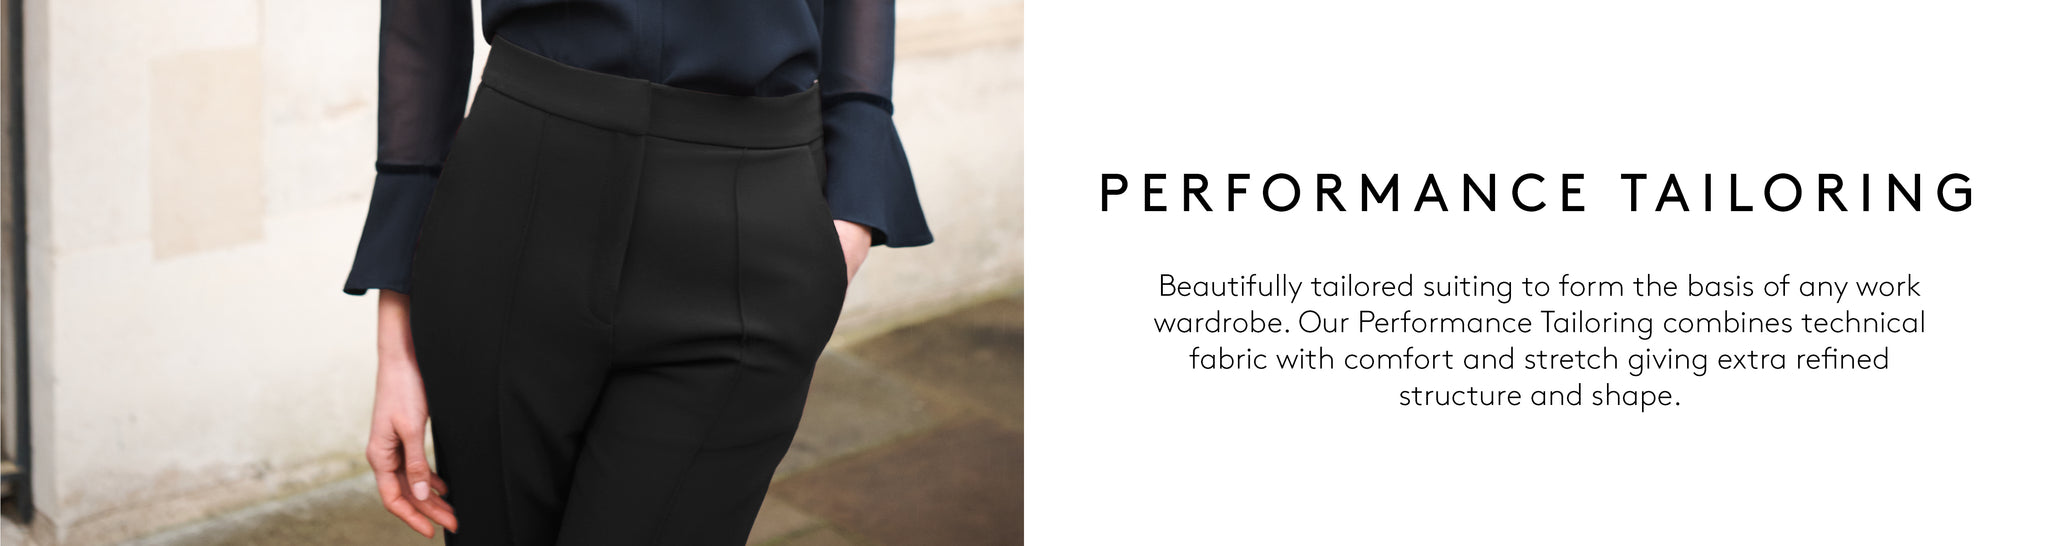 Beautifully tailored suiting to form the basis of any work  wardrobe. Our Performance Tailoring combines technical  fabric with comfort and stretch giving extra refined  structure and shape.